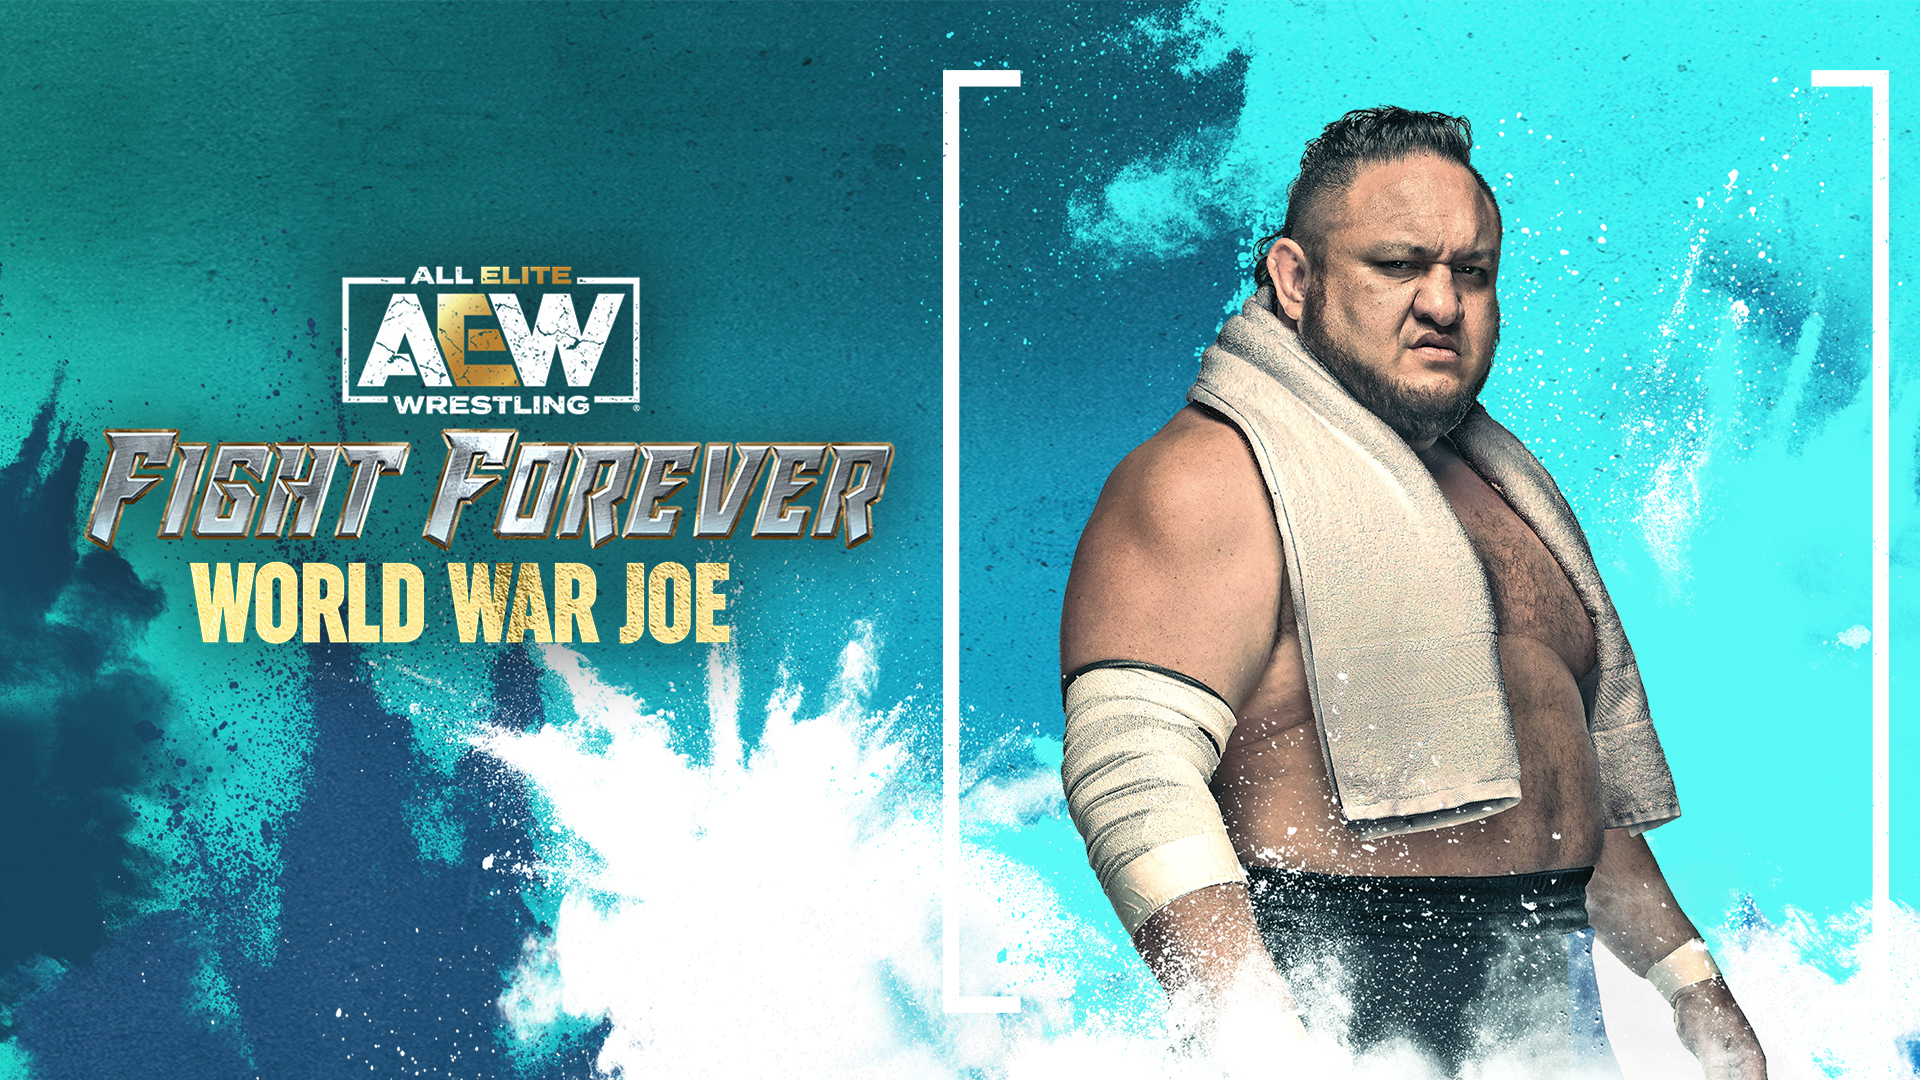 The Ultimate End Game Comes To AEW: Fight Forever In World War Joe DLC